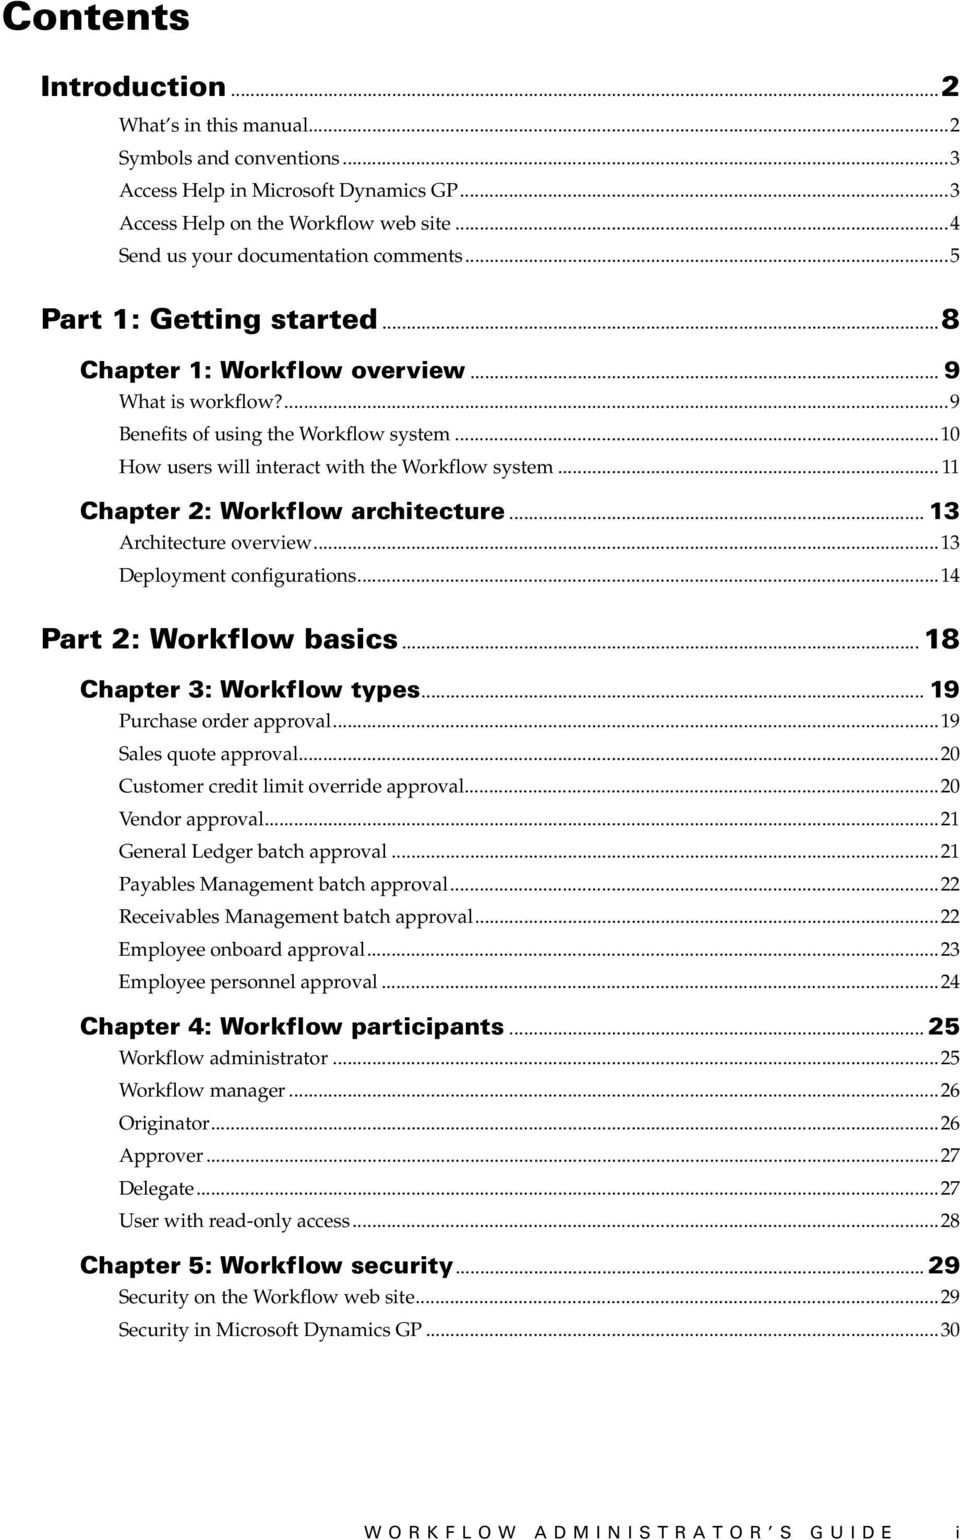 .. 11 Chapter 2: Workflow architecture... 13 Architecture overview...13 Deployment configurations...14 Part 2: Workflow basics... 18 Chapter 3: Workflow types... 19 Purchase order approval.